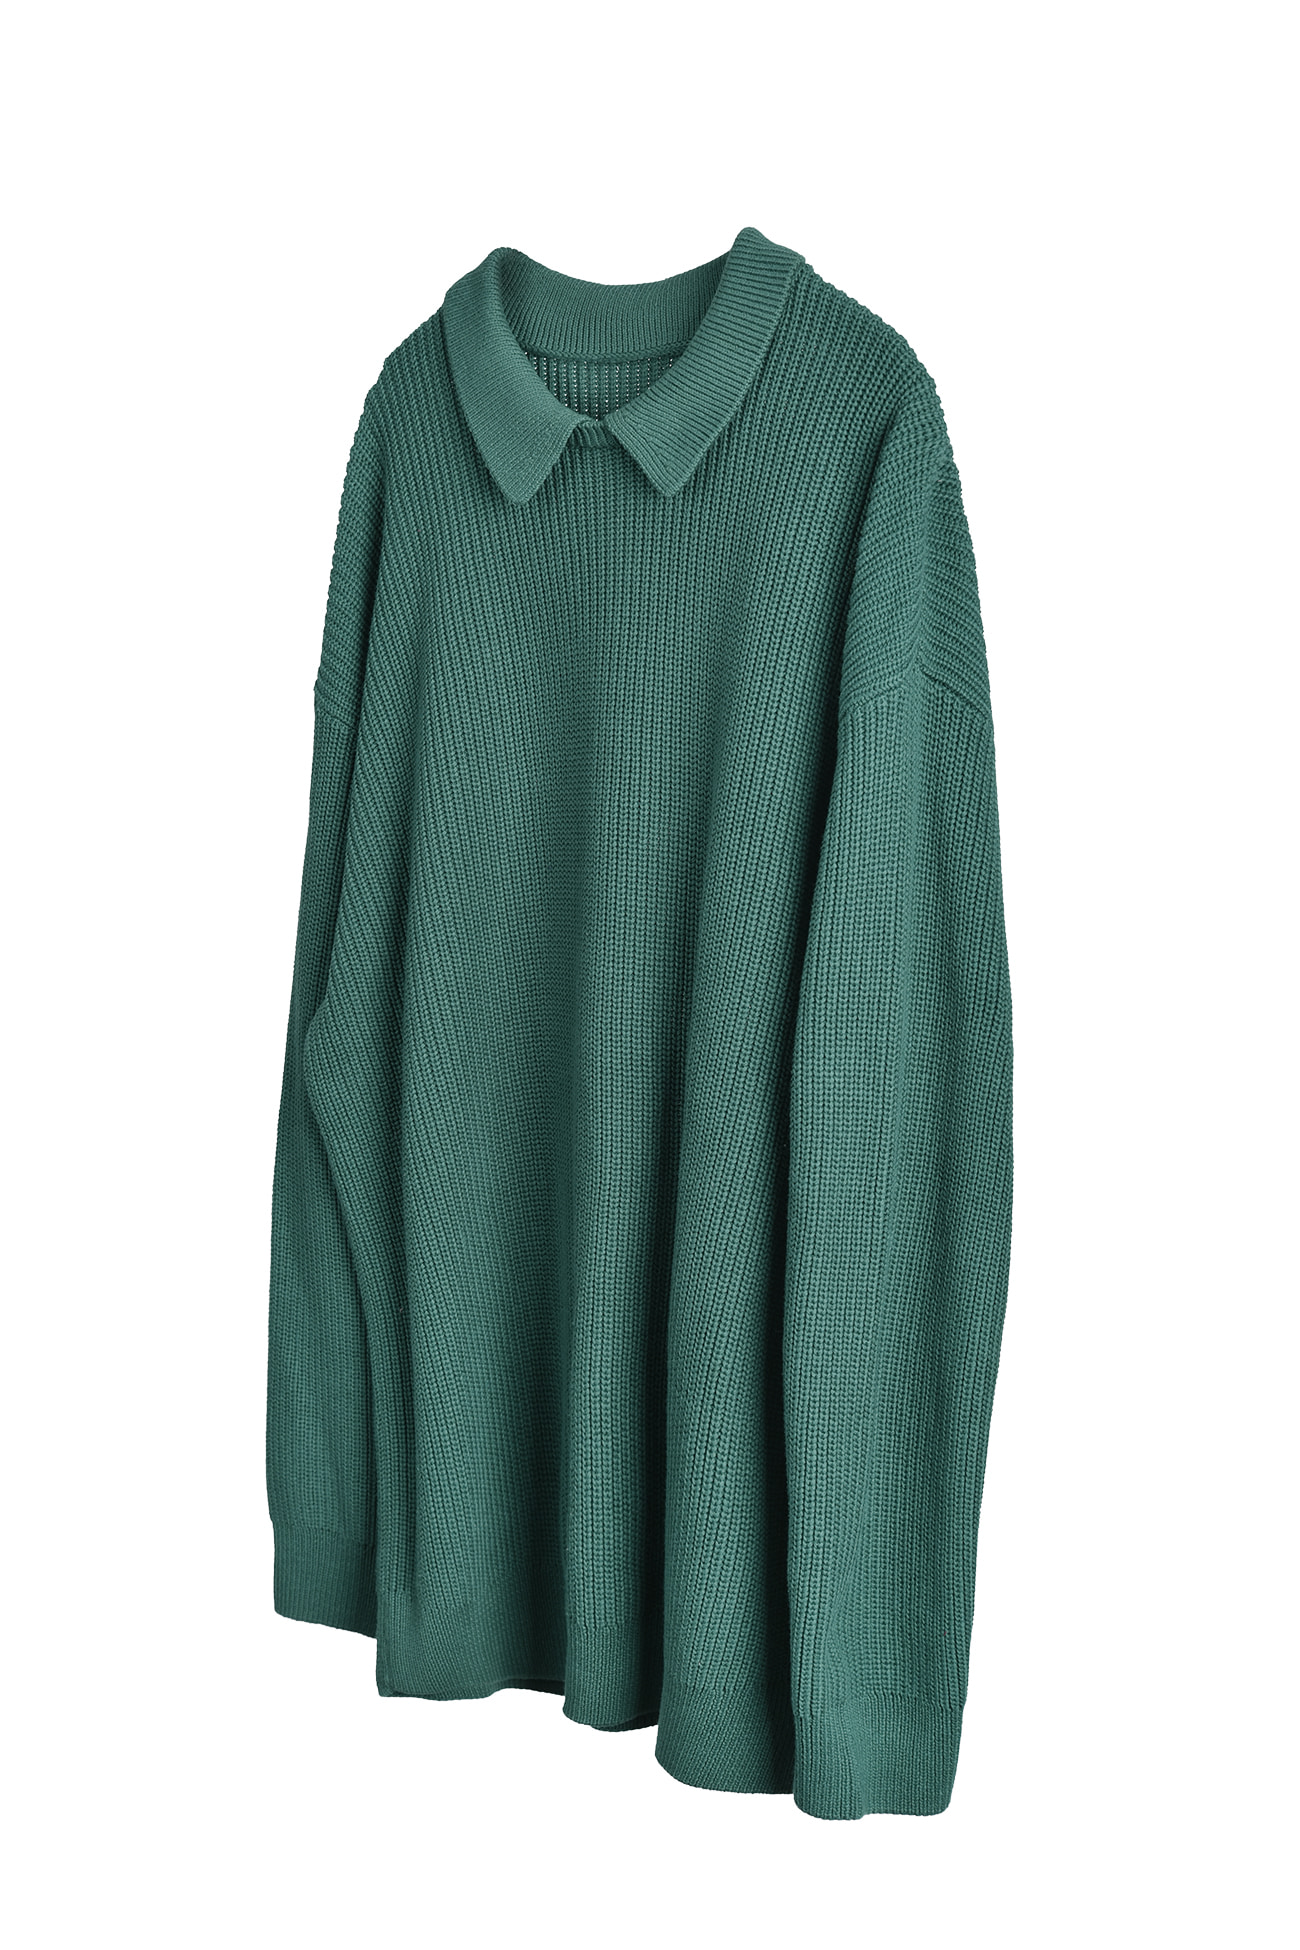 COLLAR KNIT SWEATER [FOREST]